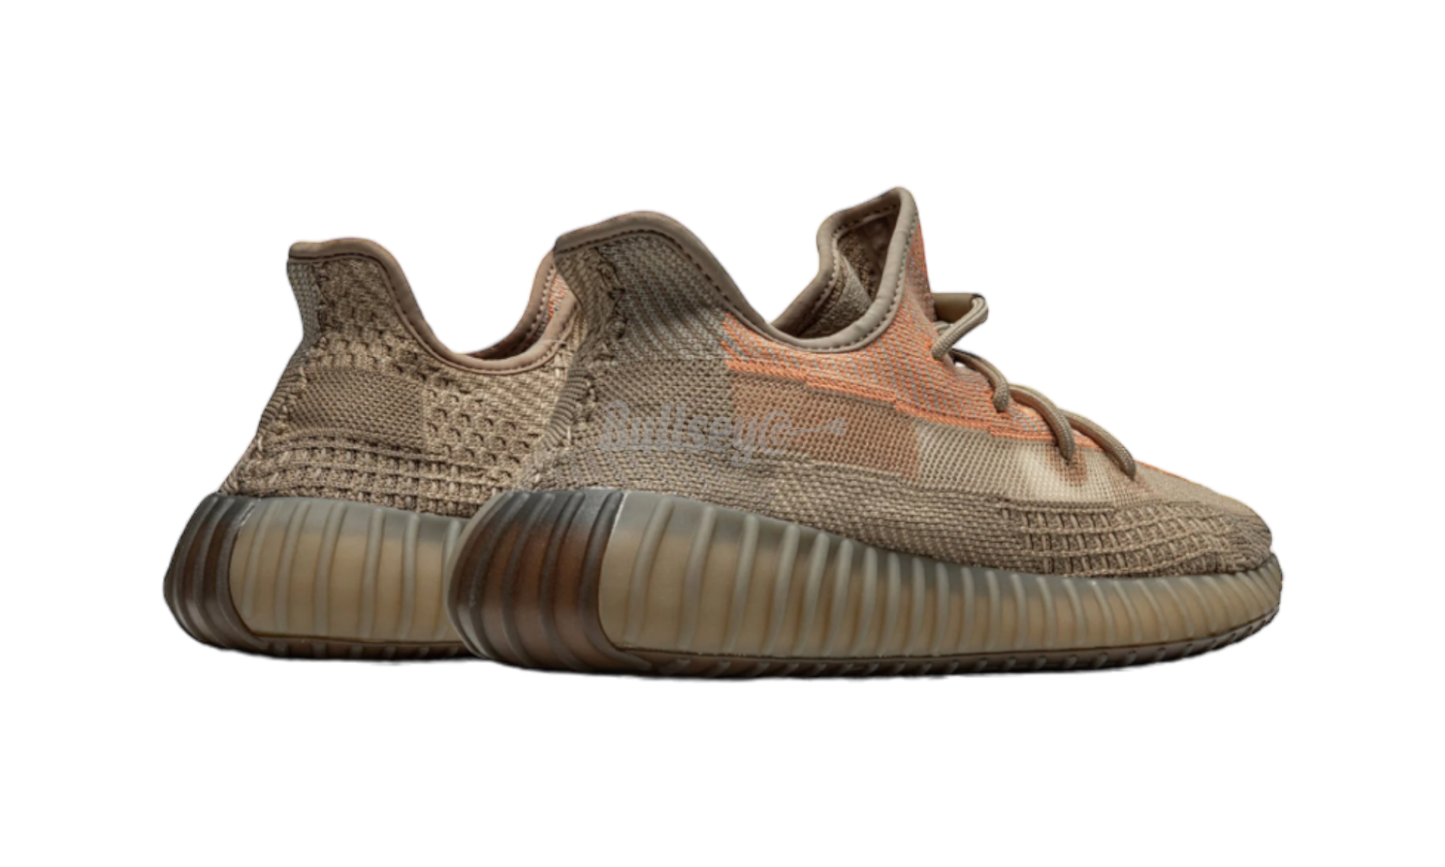 Adidas Yeezy Boost 350 "Sand Taupe"